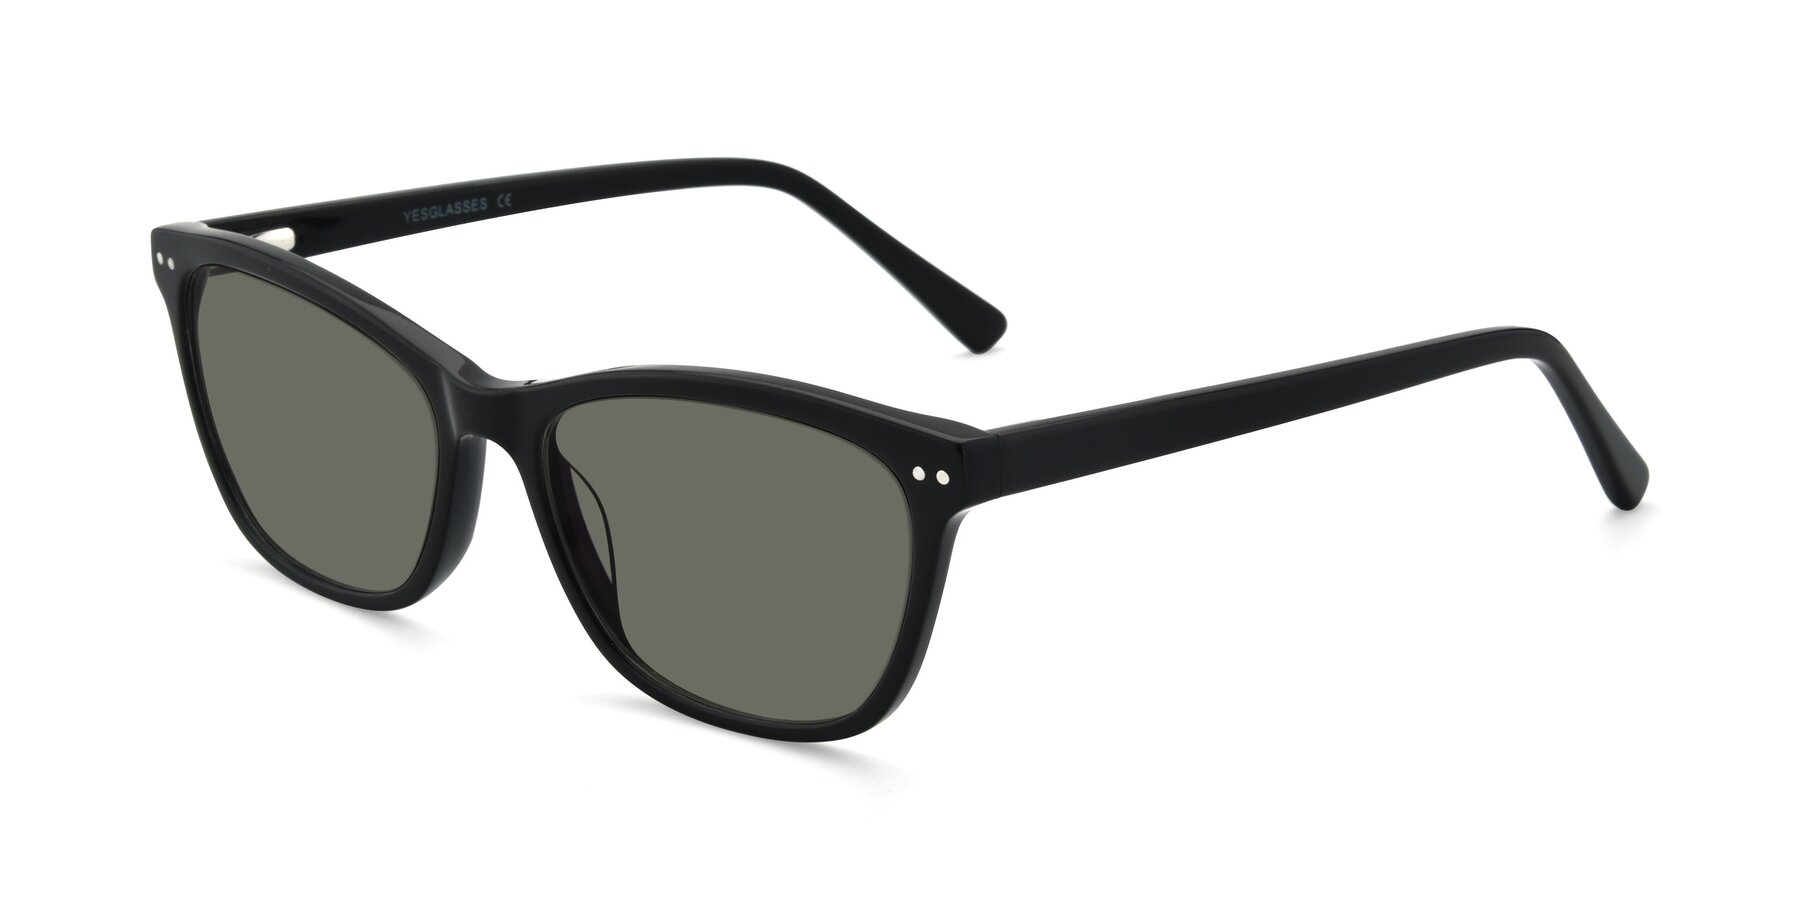 Angle of 17350 in Black with Gray Polarized Lenses